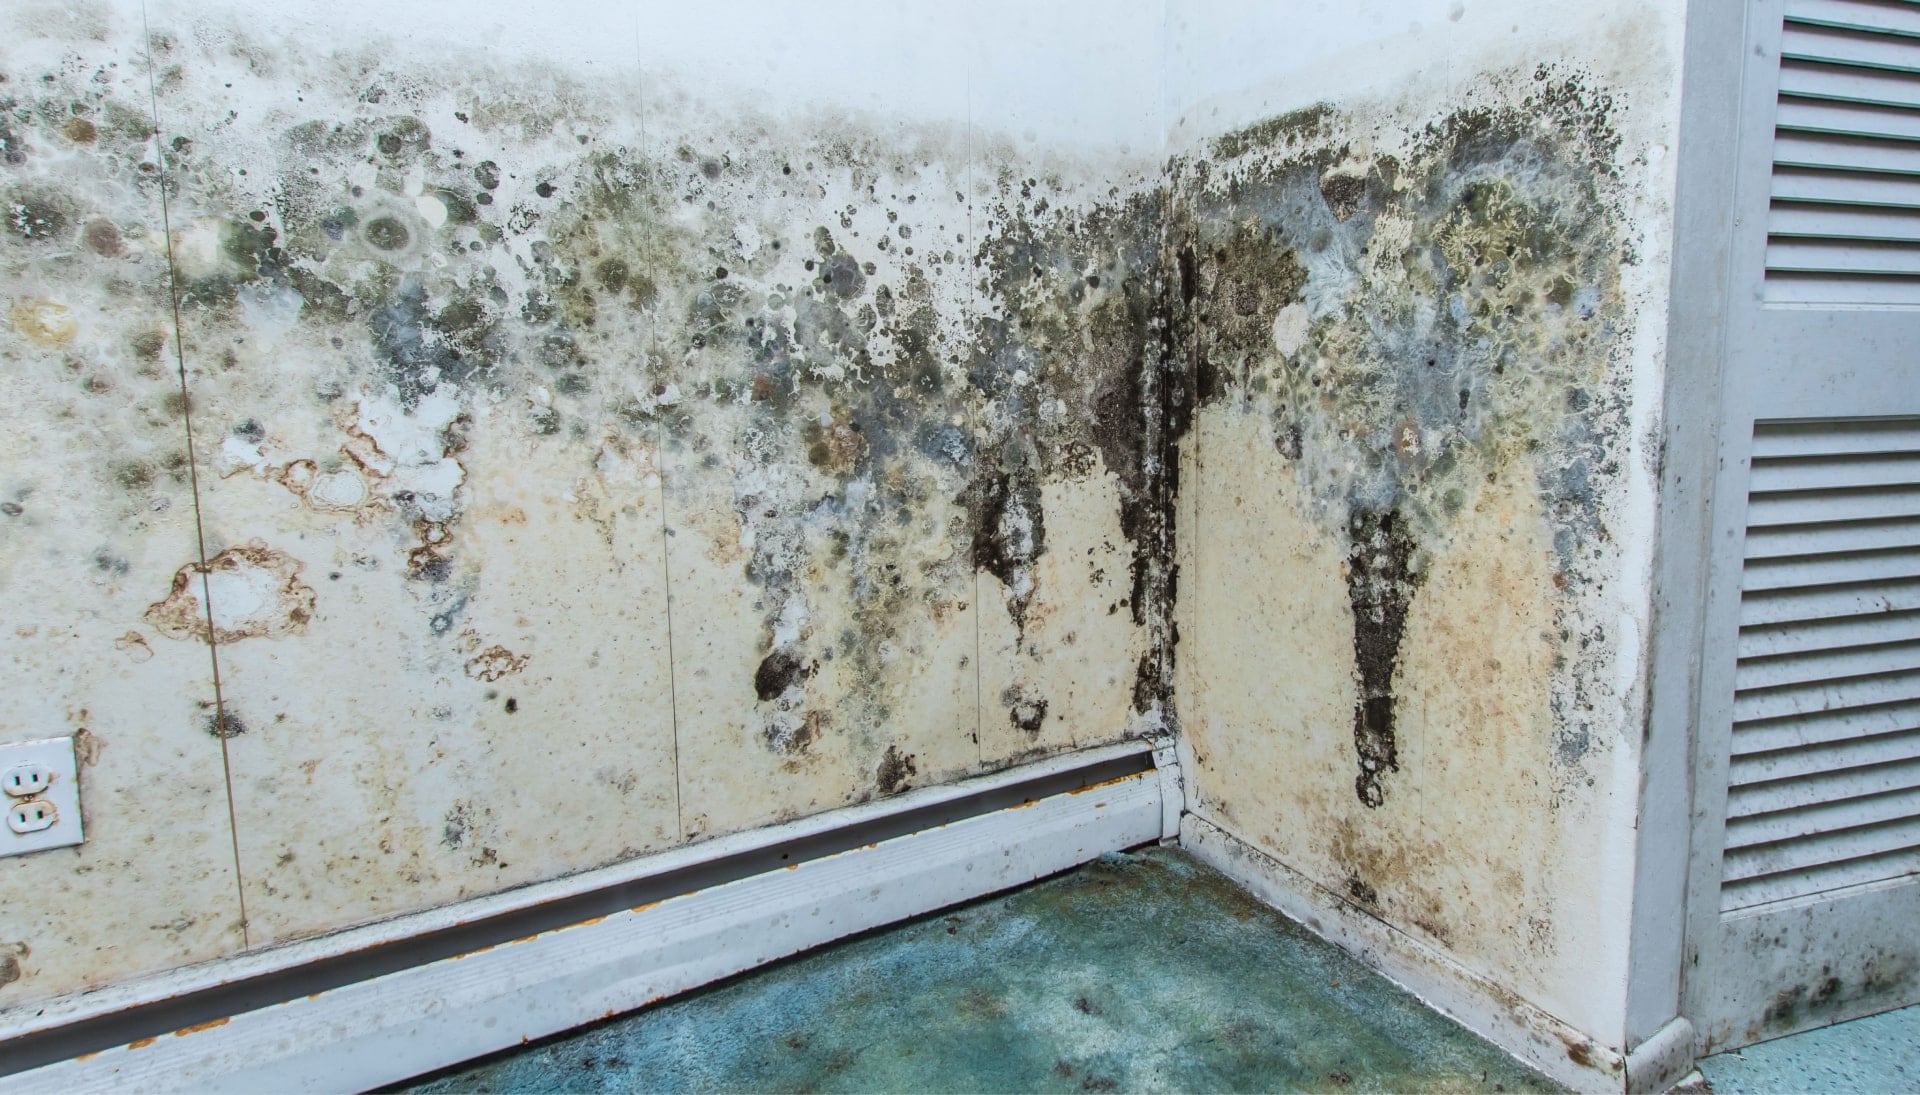 A mold remediation team using specialized techniques to remove mold damage and control odors in a Knoxville property, with a focus on safety and efficiency